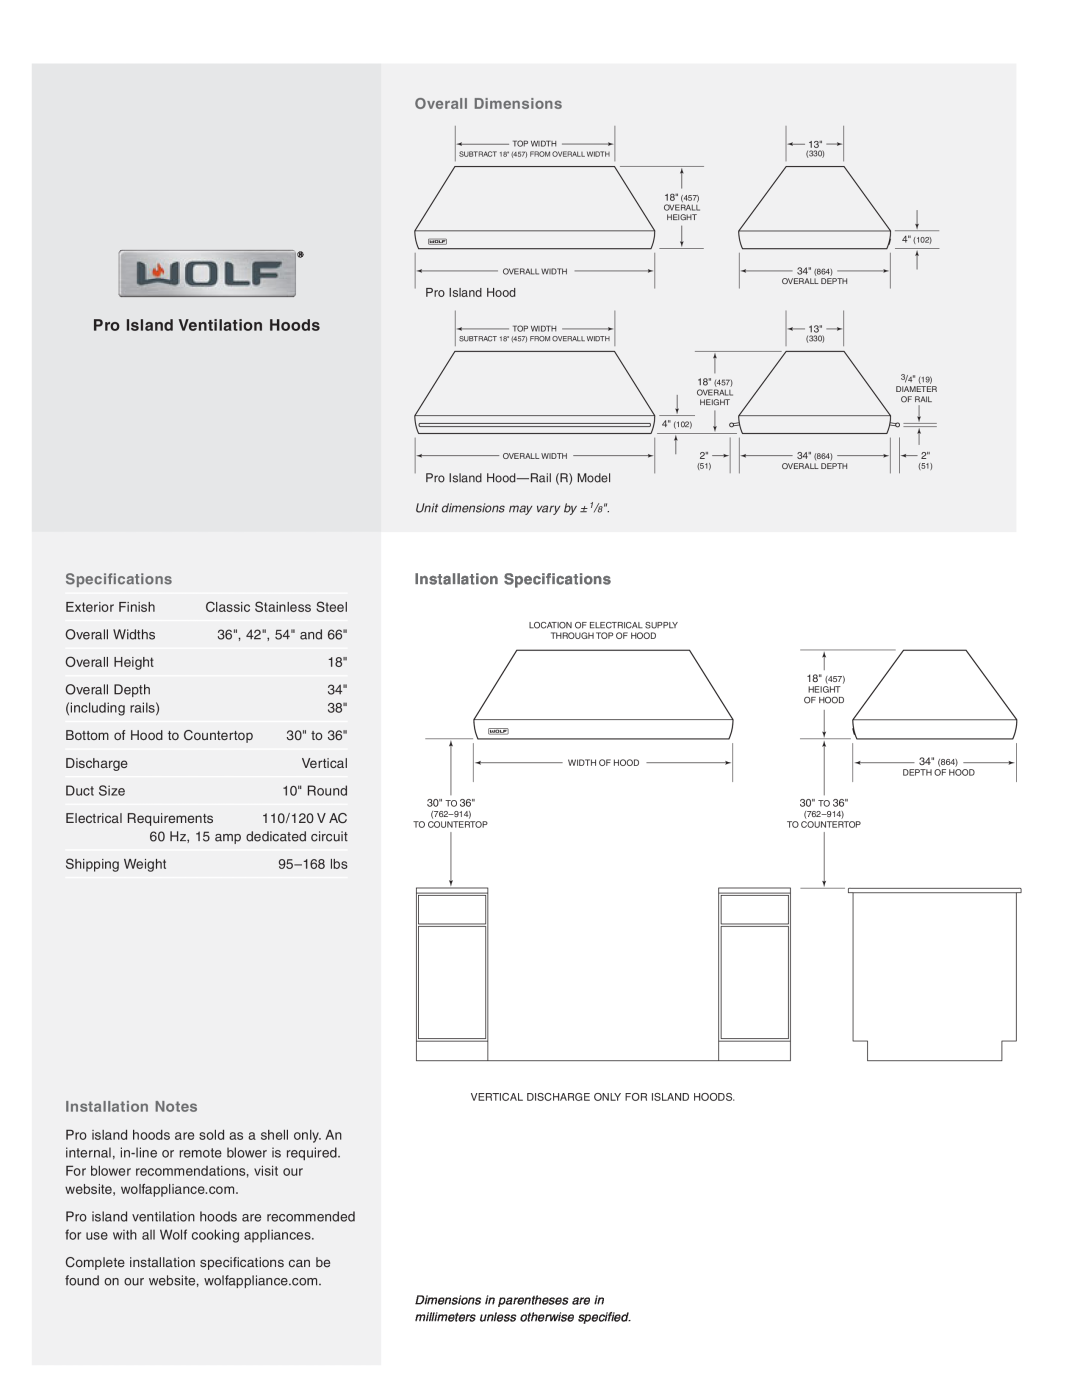 Wolf Appliance Company PI363418, PI423418 manual Overall Dimensions, Installation Specifications, Installation Notes 